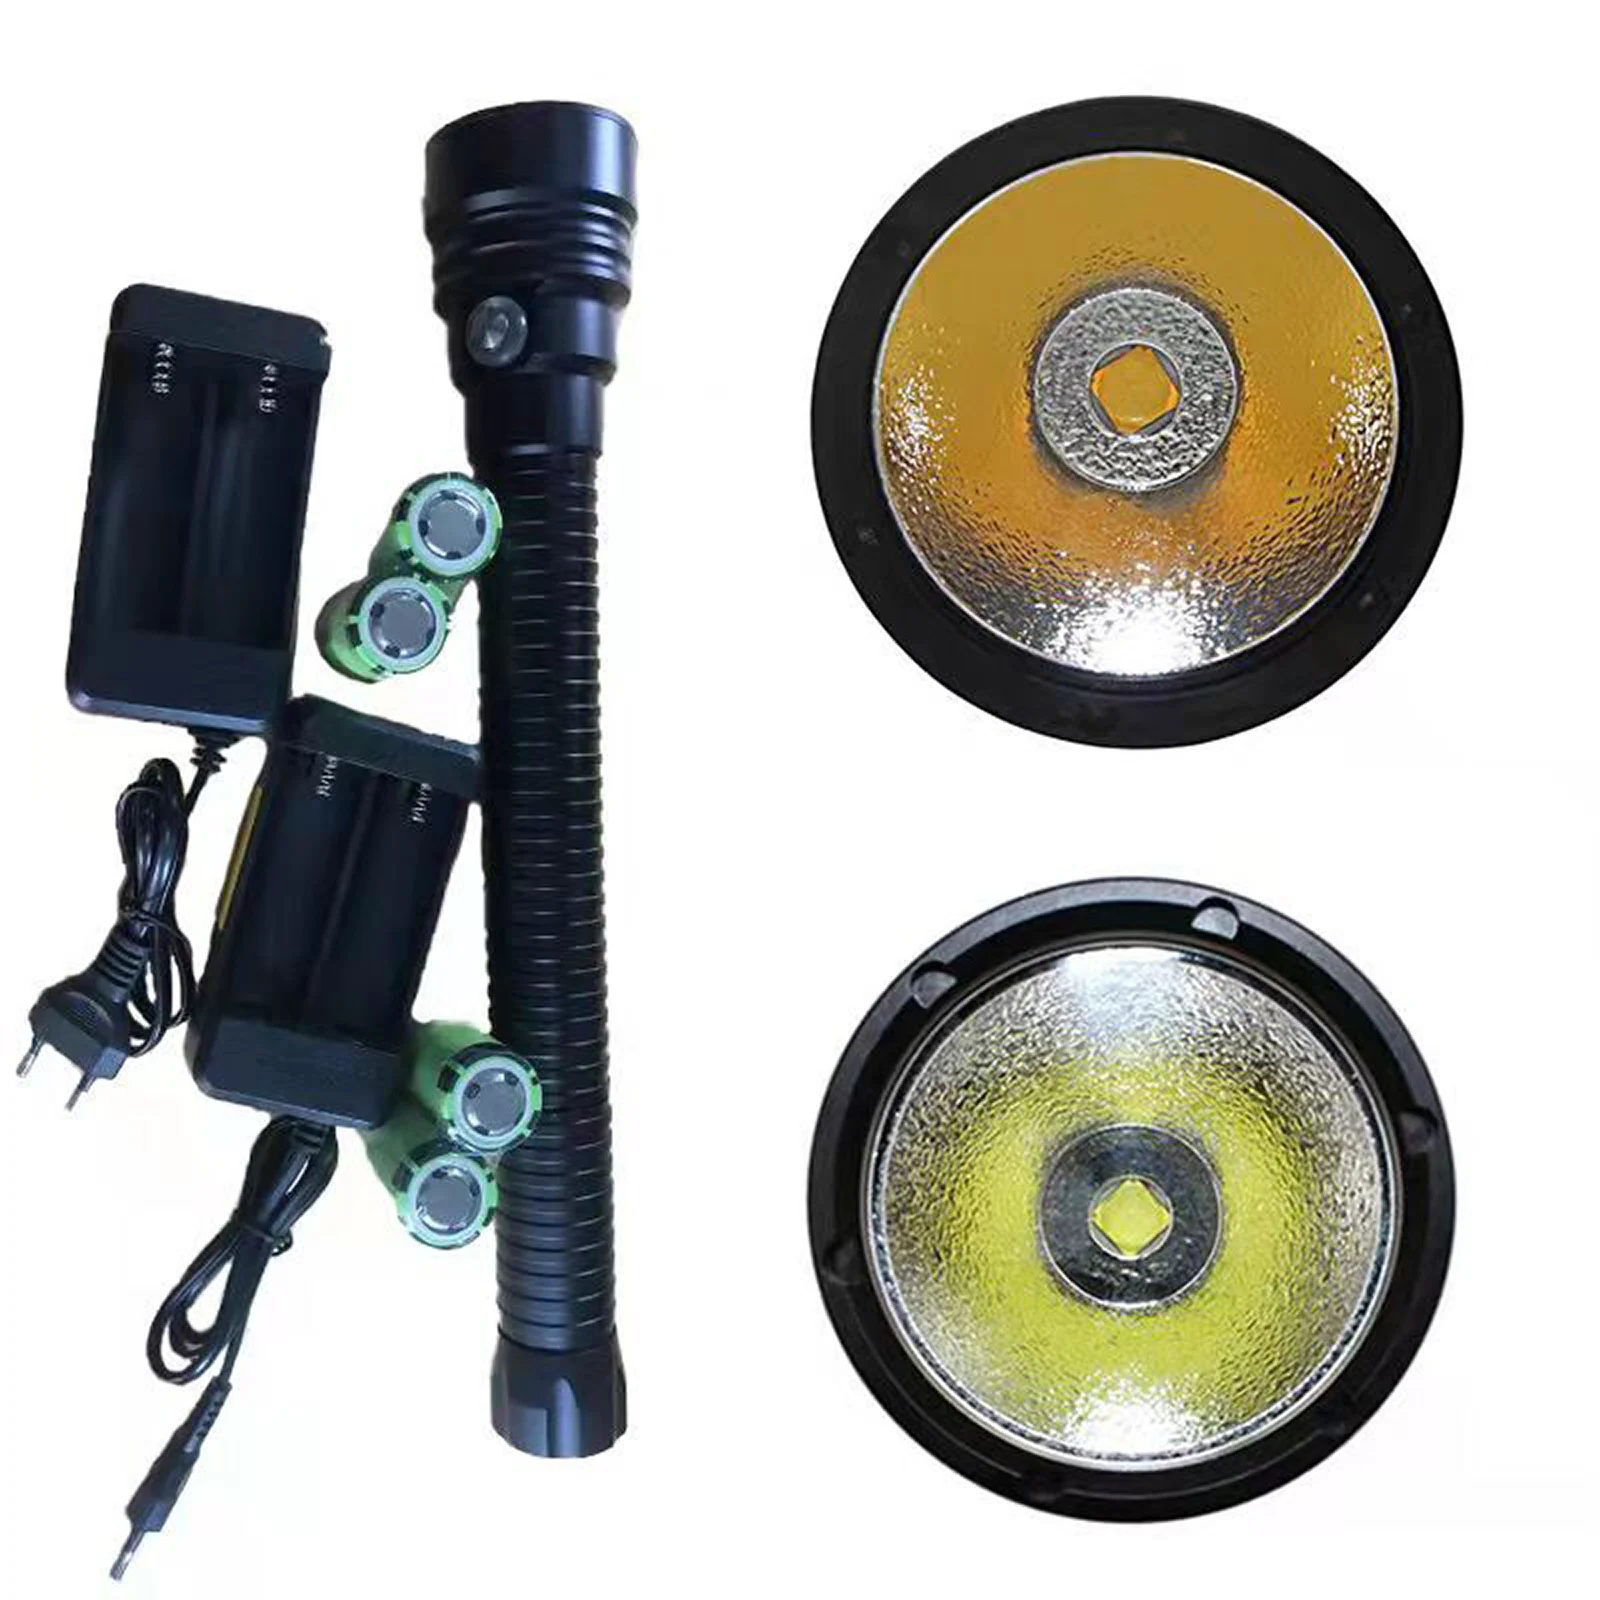 Powerful XHP70.2 led Yellow/White Light 4000 Lumens Diving Flashlight Torch 2/3/4/*26650 battery dive light led underwater xhp70 18v 4 0ah makita original with led lithium ion replacement lxt bl1860b bl1860 bl1850 makita rechargeable power tool battery 4000